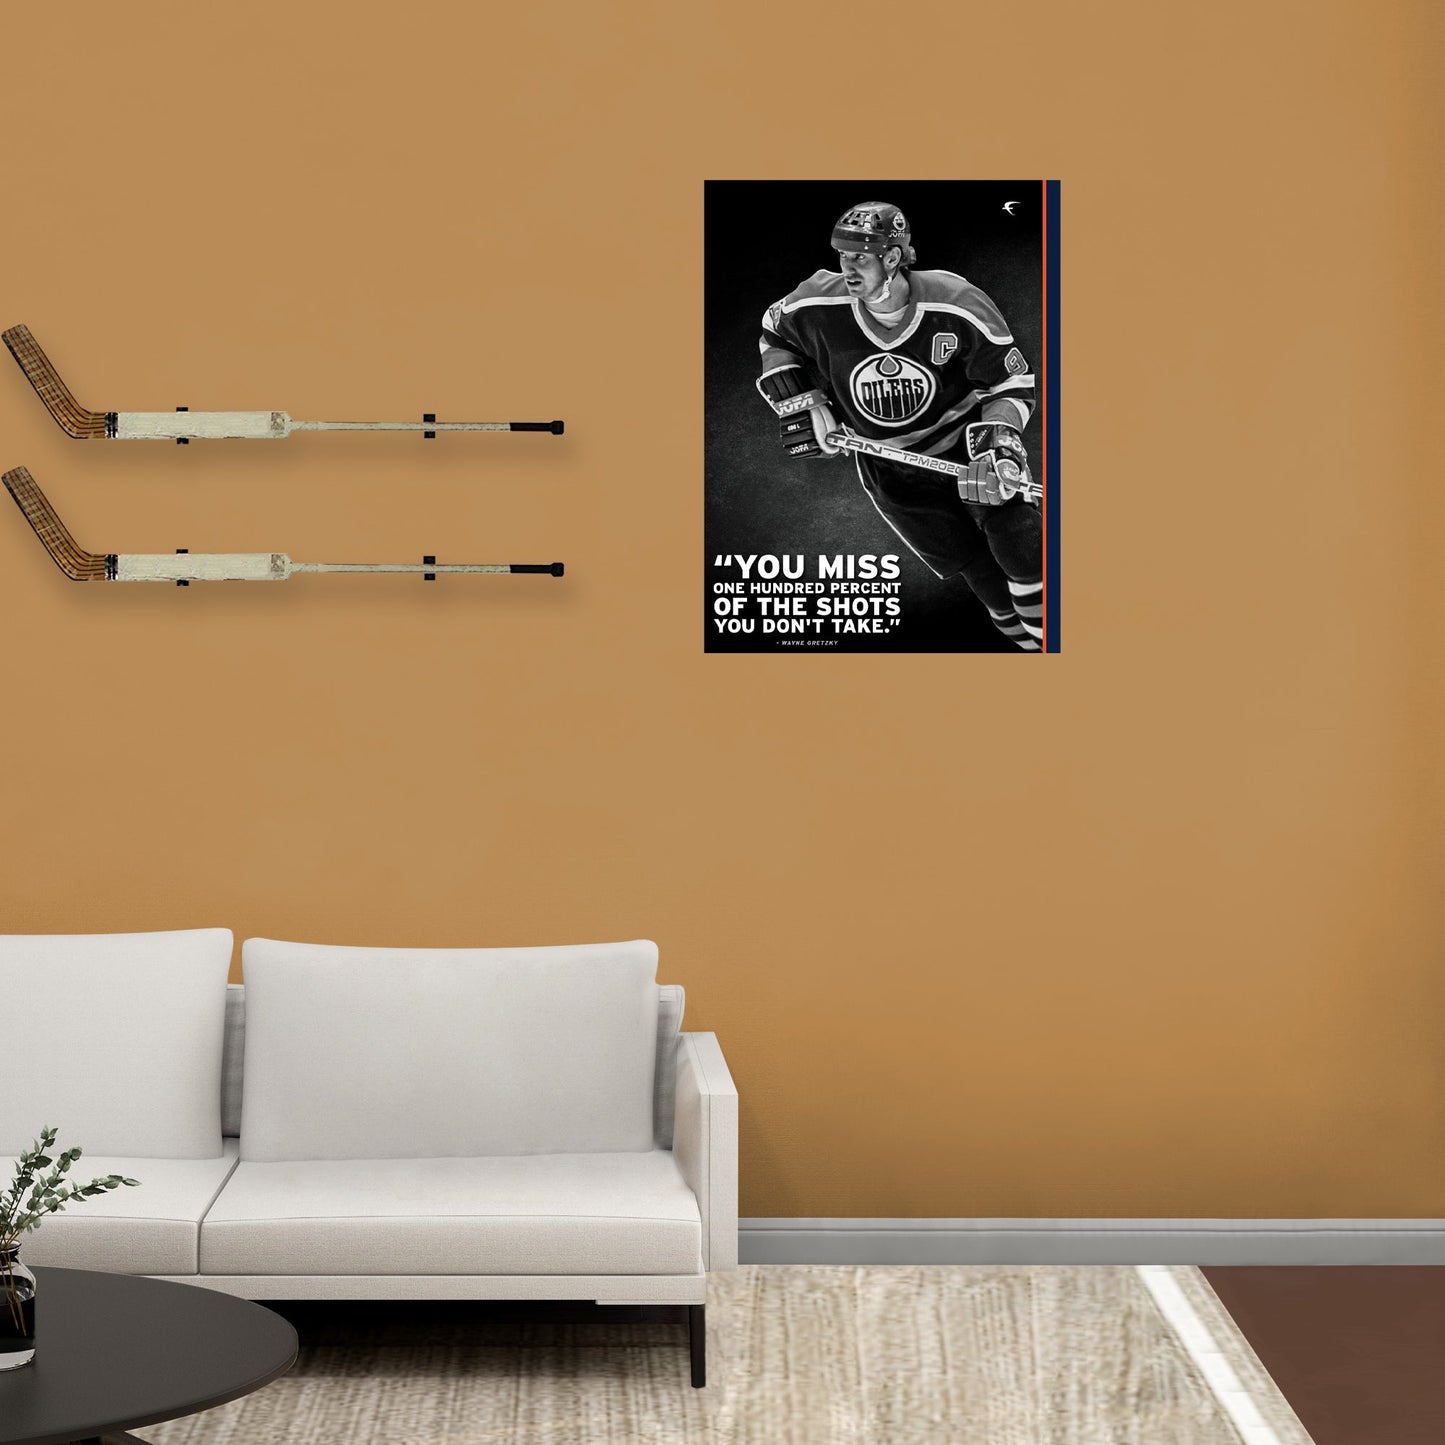 Edmonton Oilers: Wayne Gretzky Inspirational Poster - Officially Licensed NHL Removable Adhesive Decal